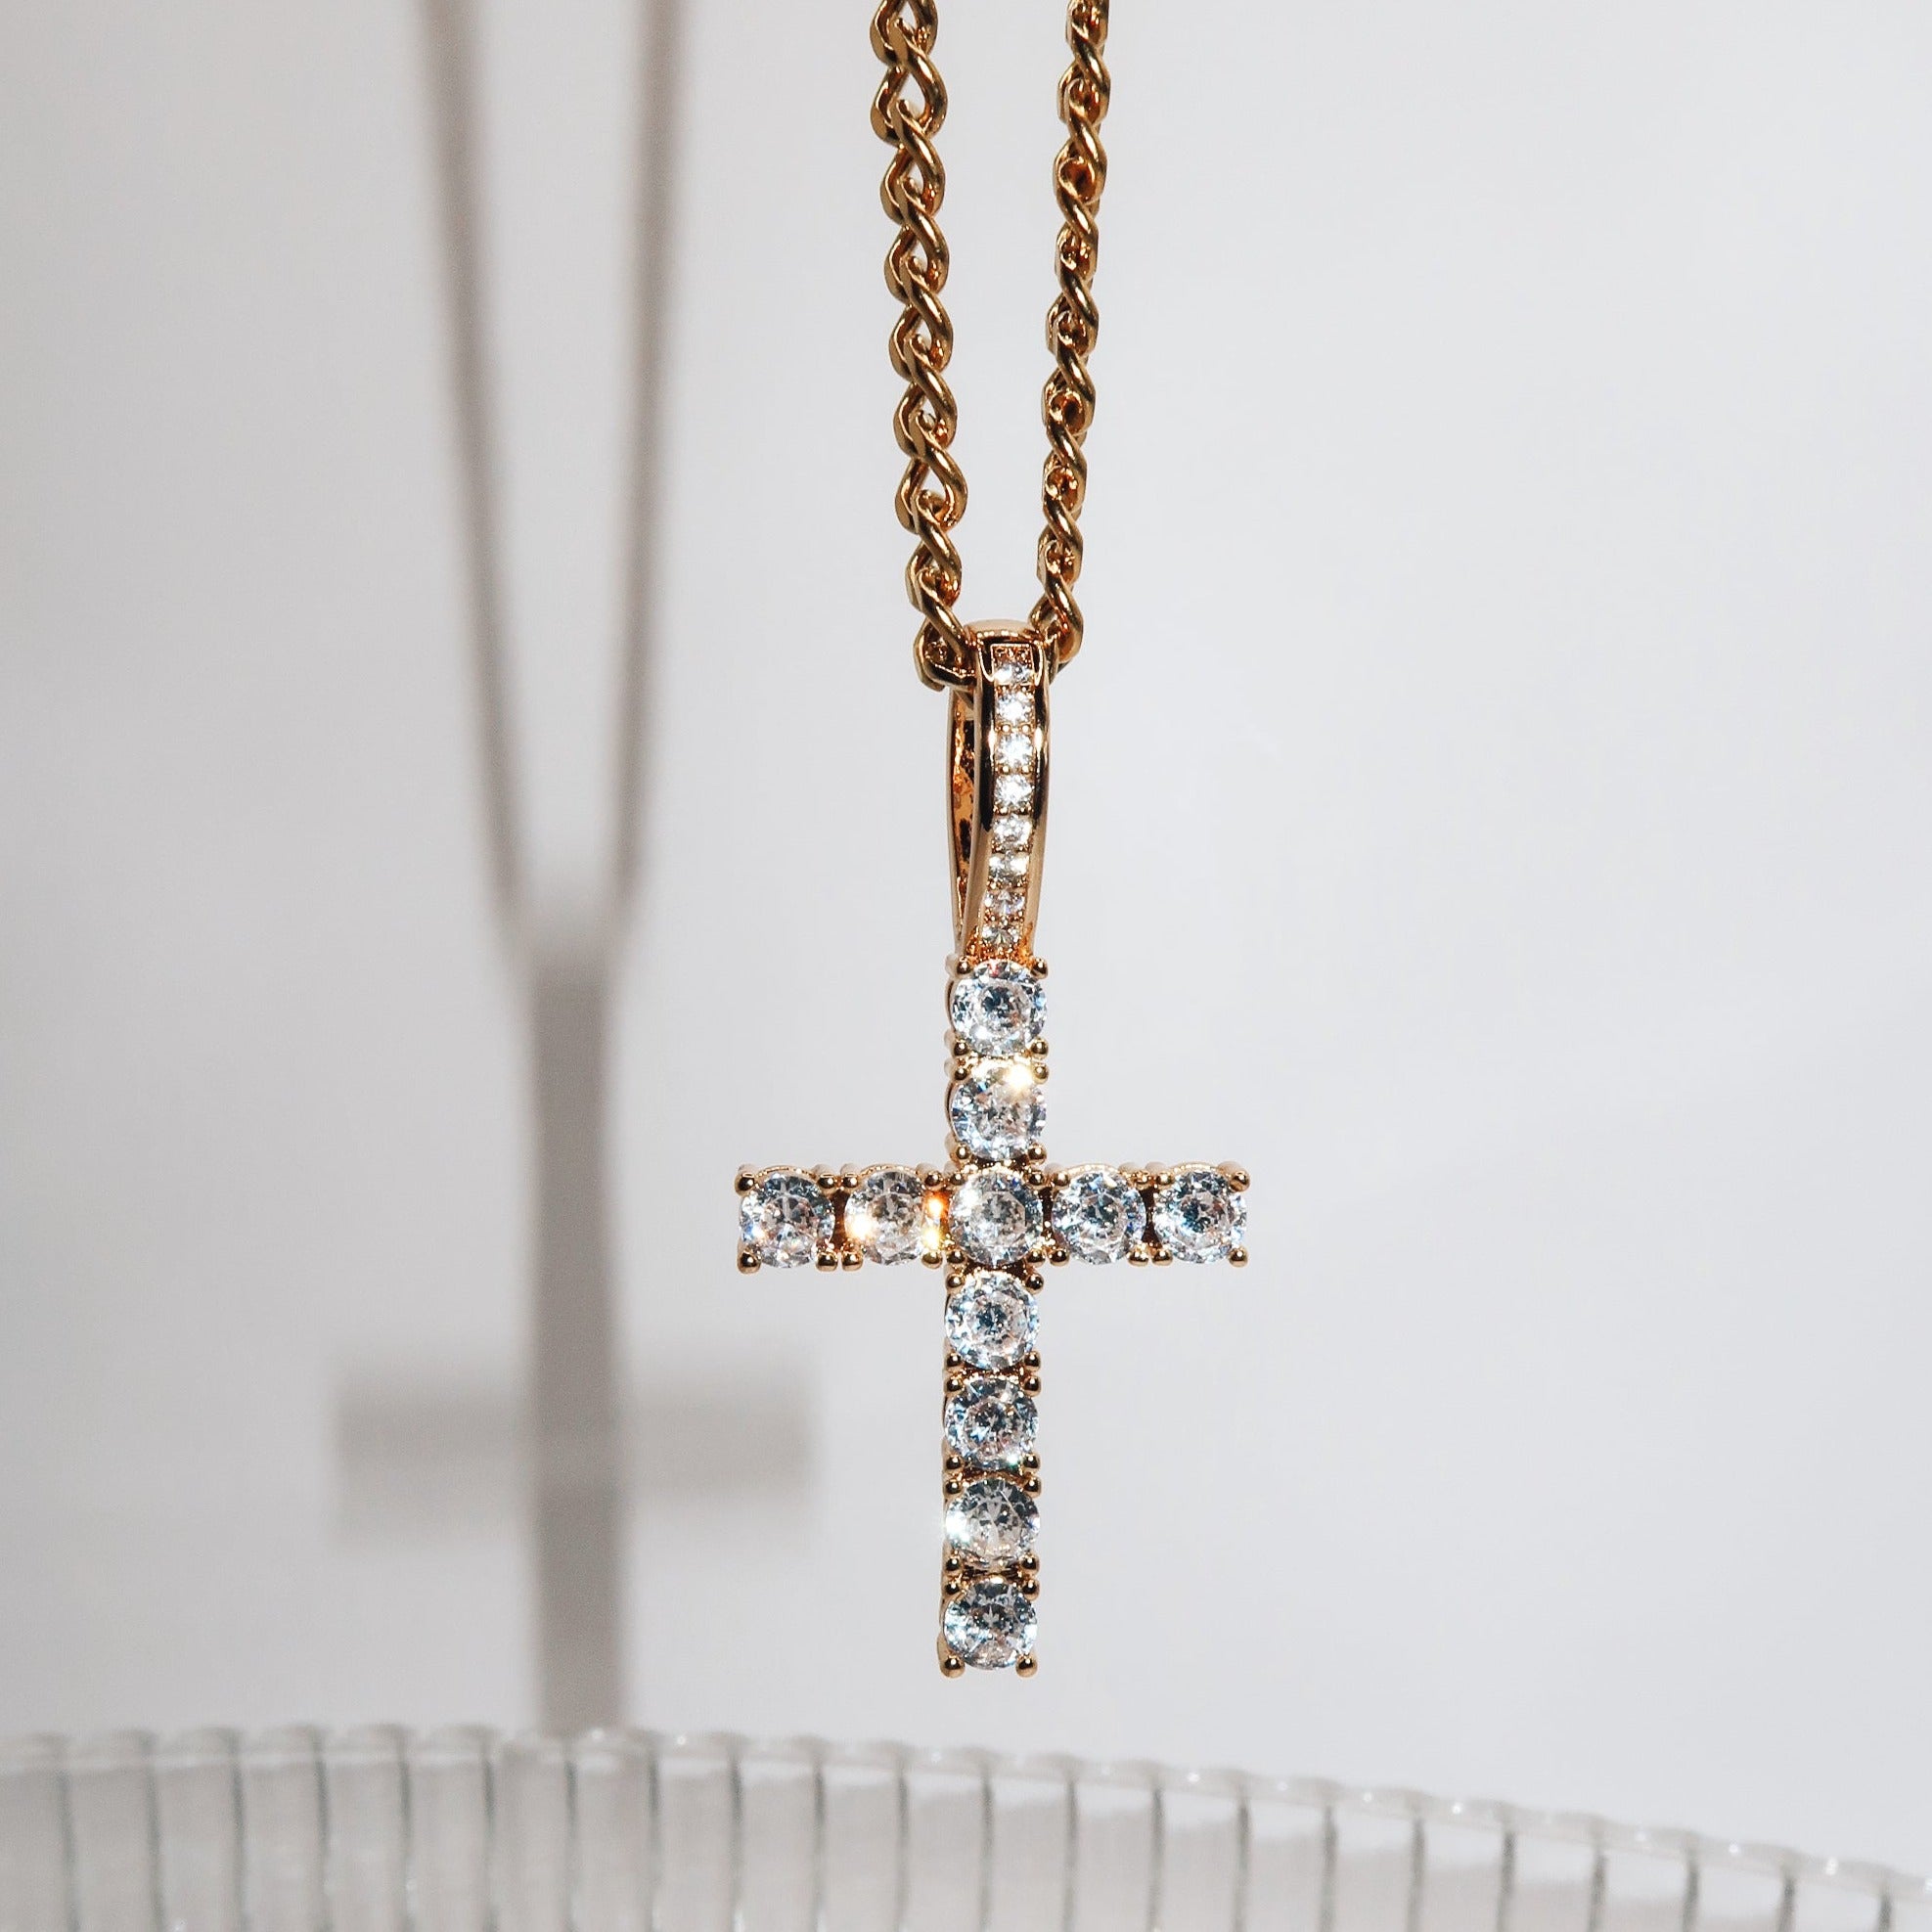 STASSIE - 18K PVD Gold Plated Cross Pendant Necklace with CZ Stones - Mixed Metals